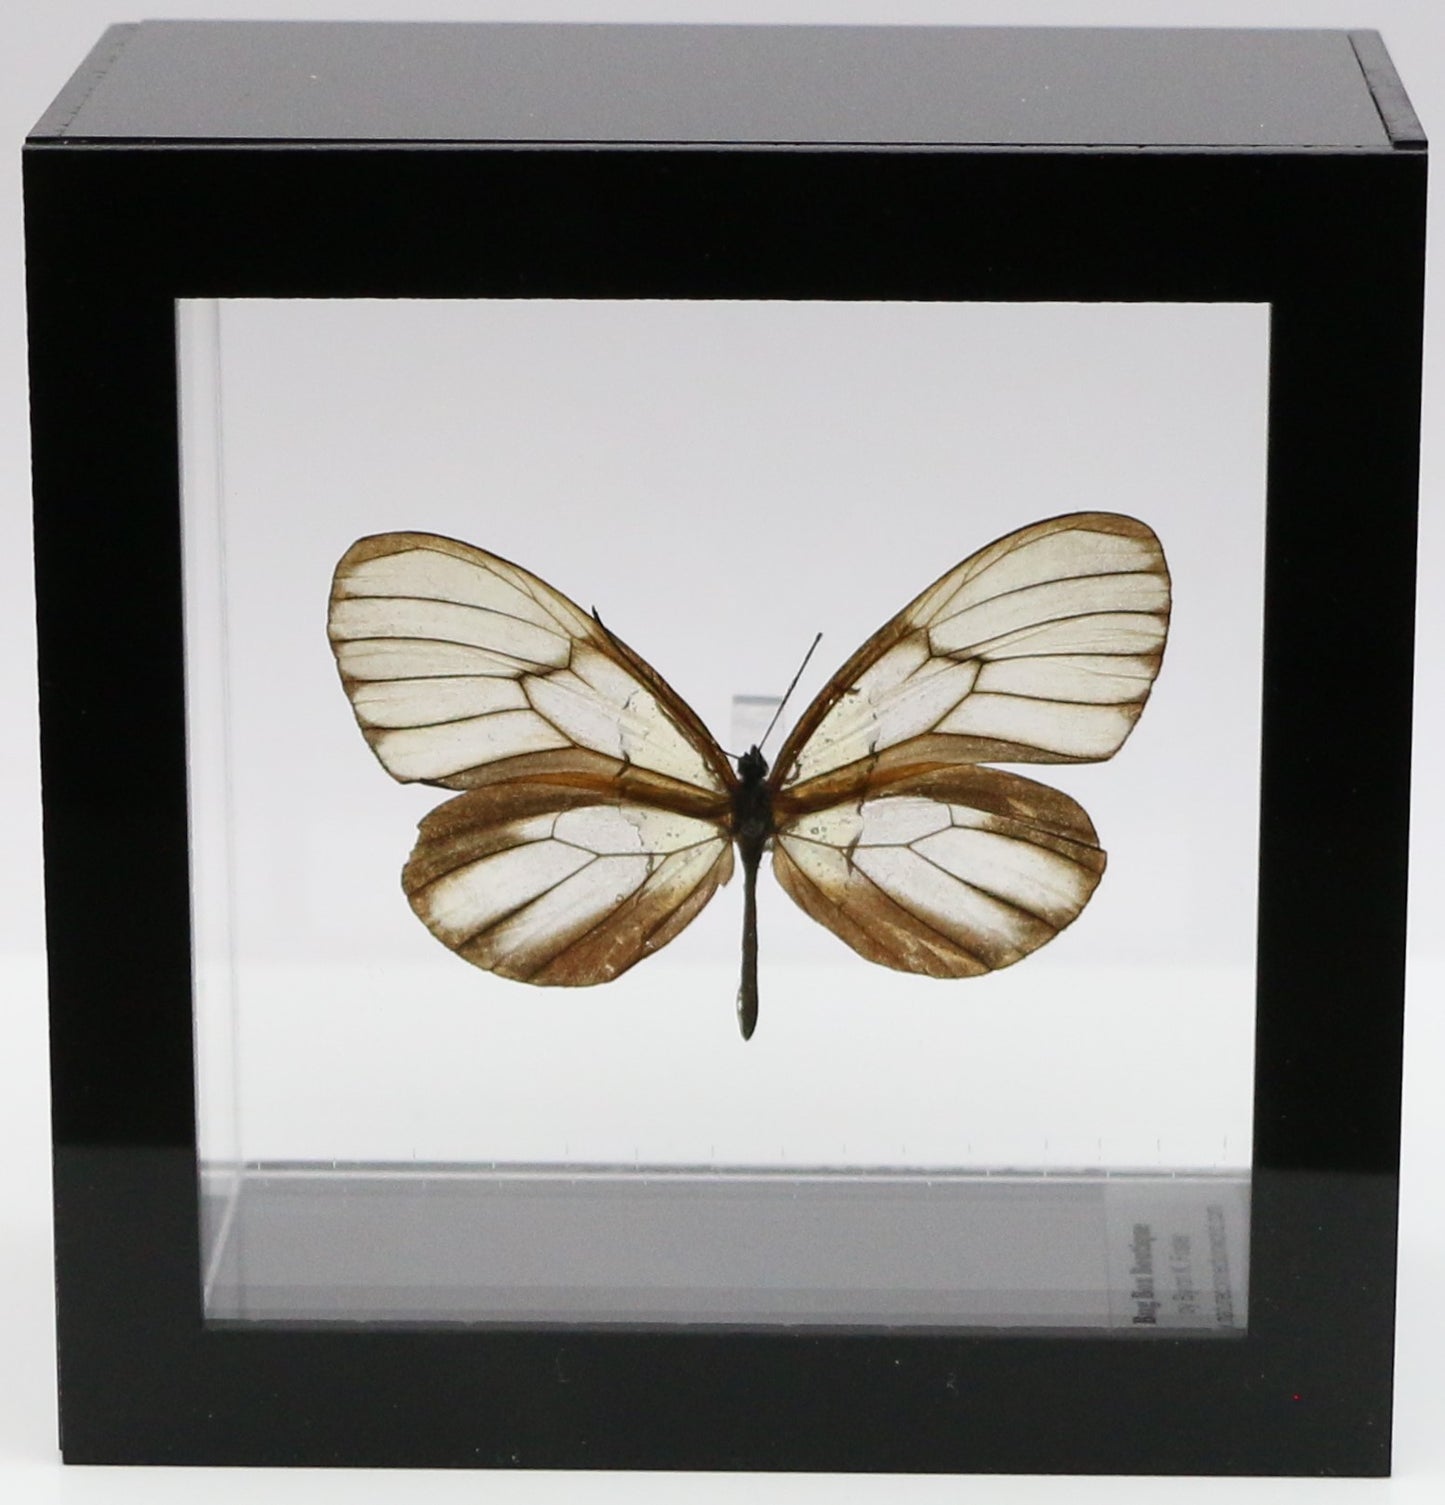 9040413 - Real Butterfly Acrylic Display Box - 4"X4" - Clearwing Butterfly (Godyris duillia)